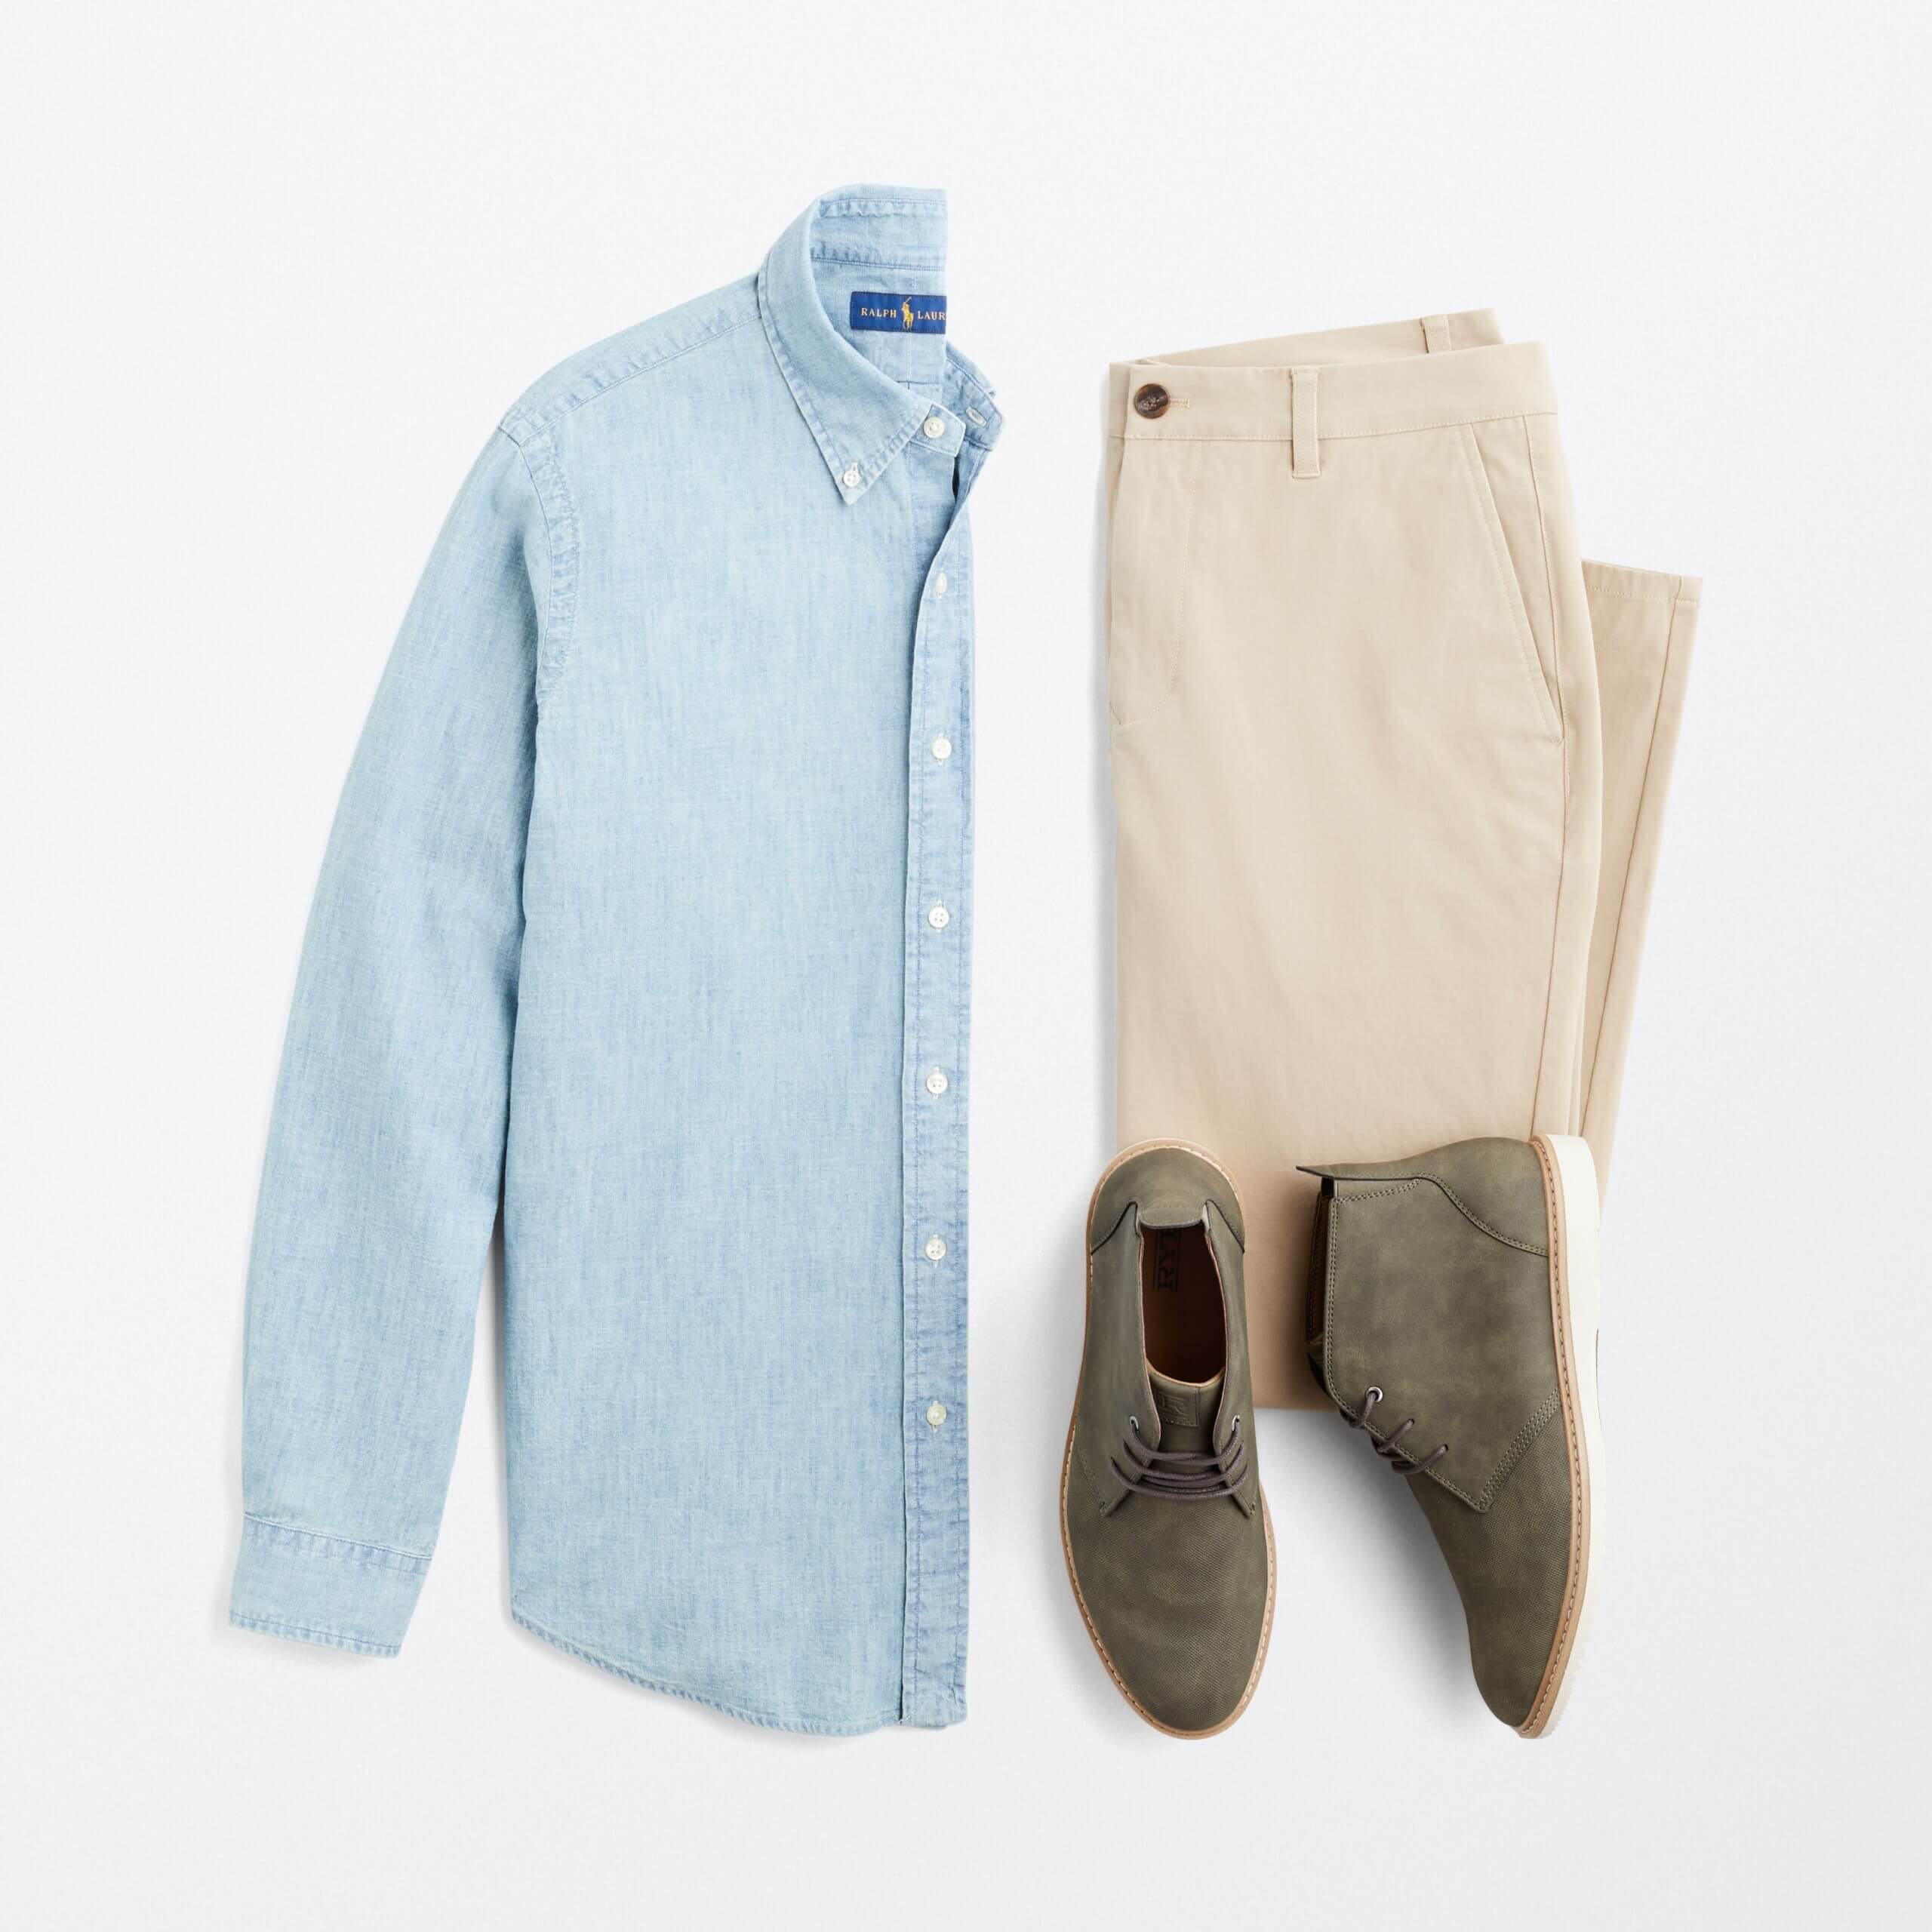 Stitch Fix men’s graduation outfit featuring a blue button-down, beige chinos pants and green suede chukkas.